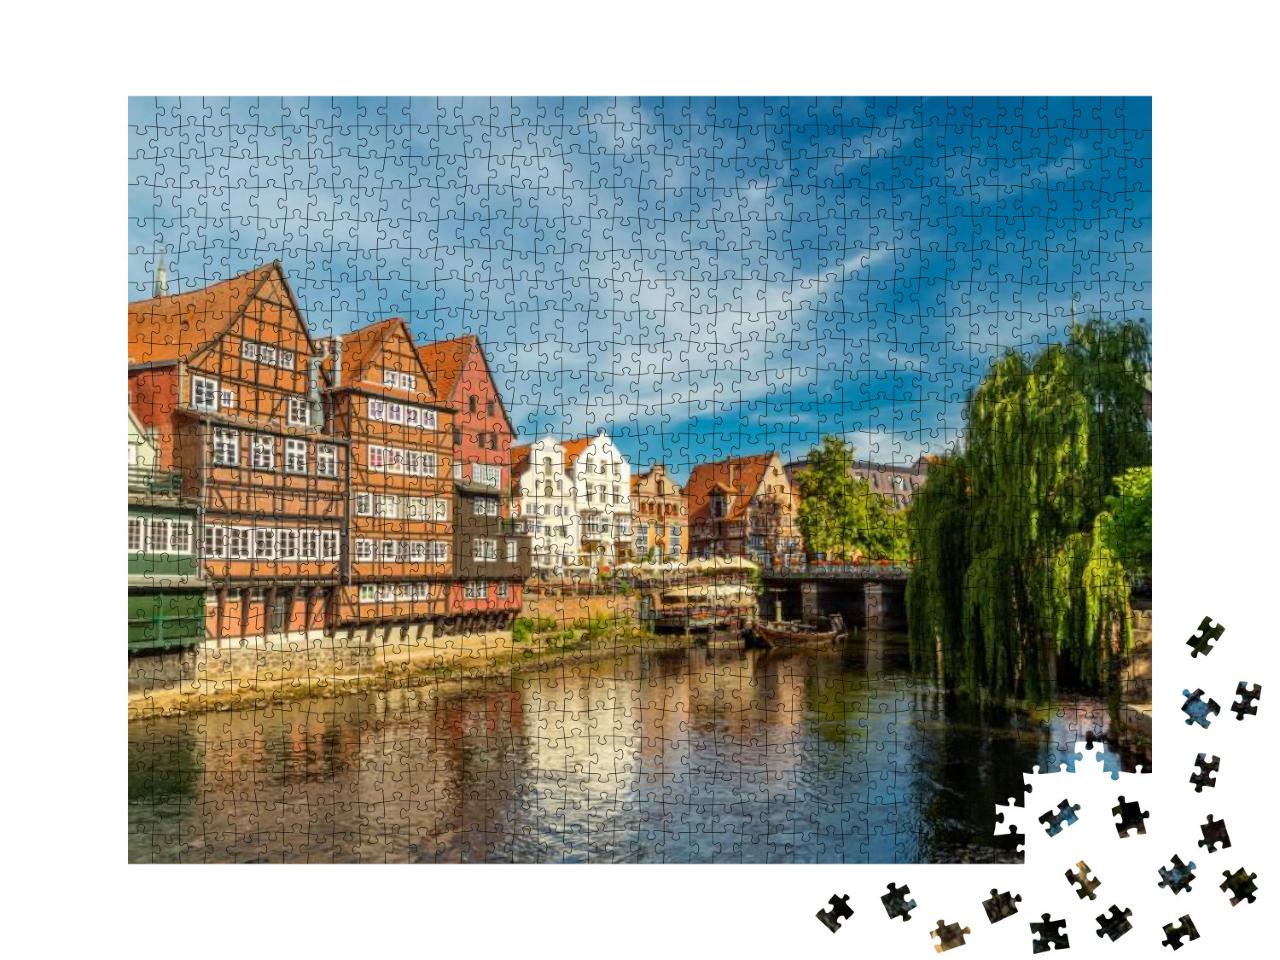 View of Lueneburg, Lower Saxony, Germany... Jigsaw Puzzle with 1000 pieces